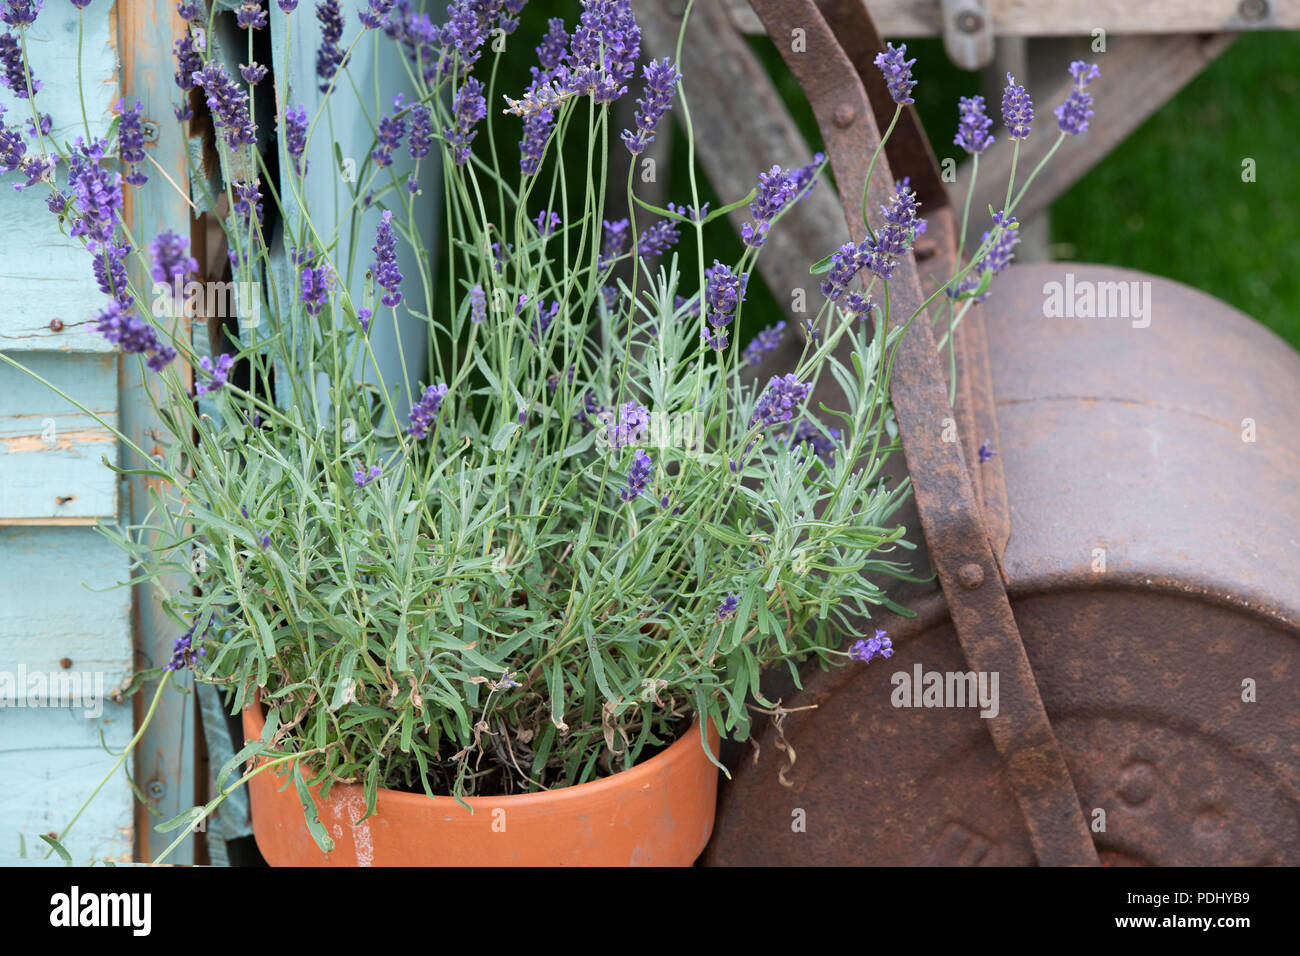 Lavandula. Lavender growing in a plant pot against a shed and vintage grass roller on a flower show display. UK Stock Photo